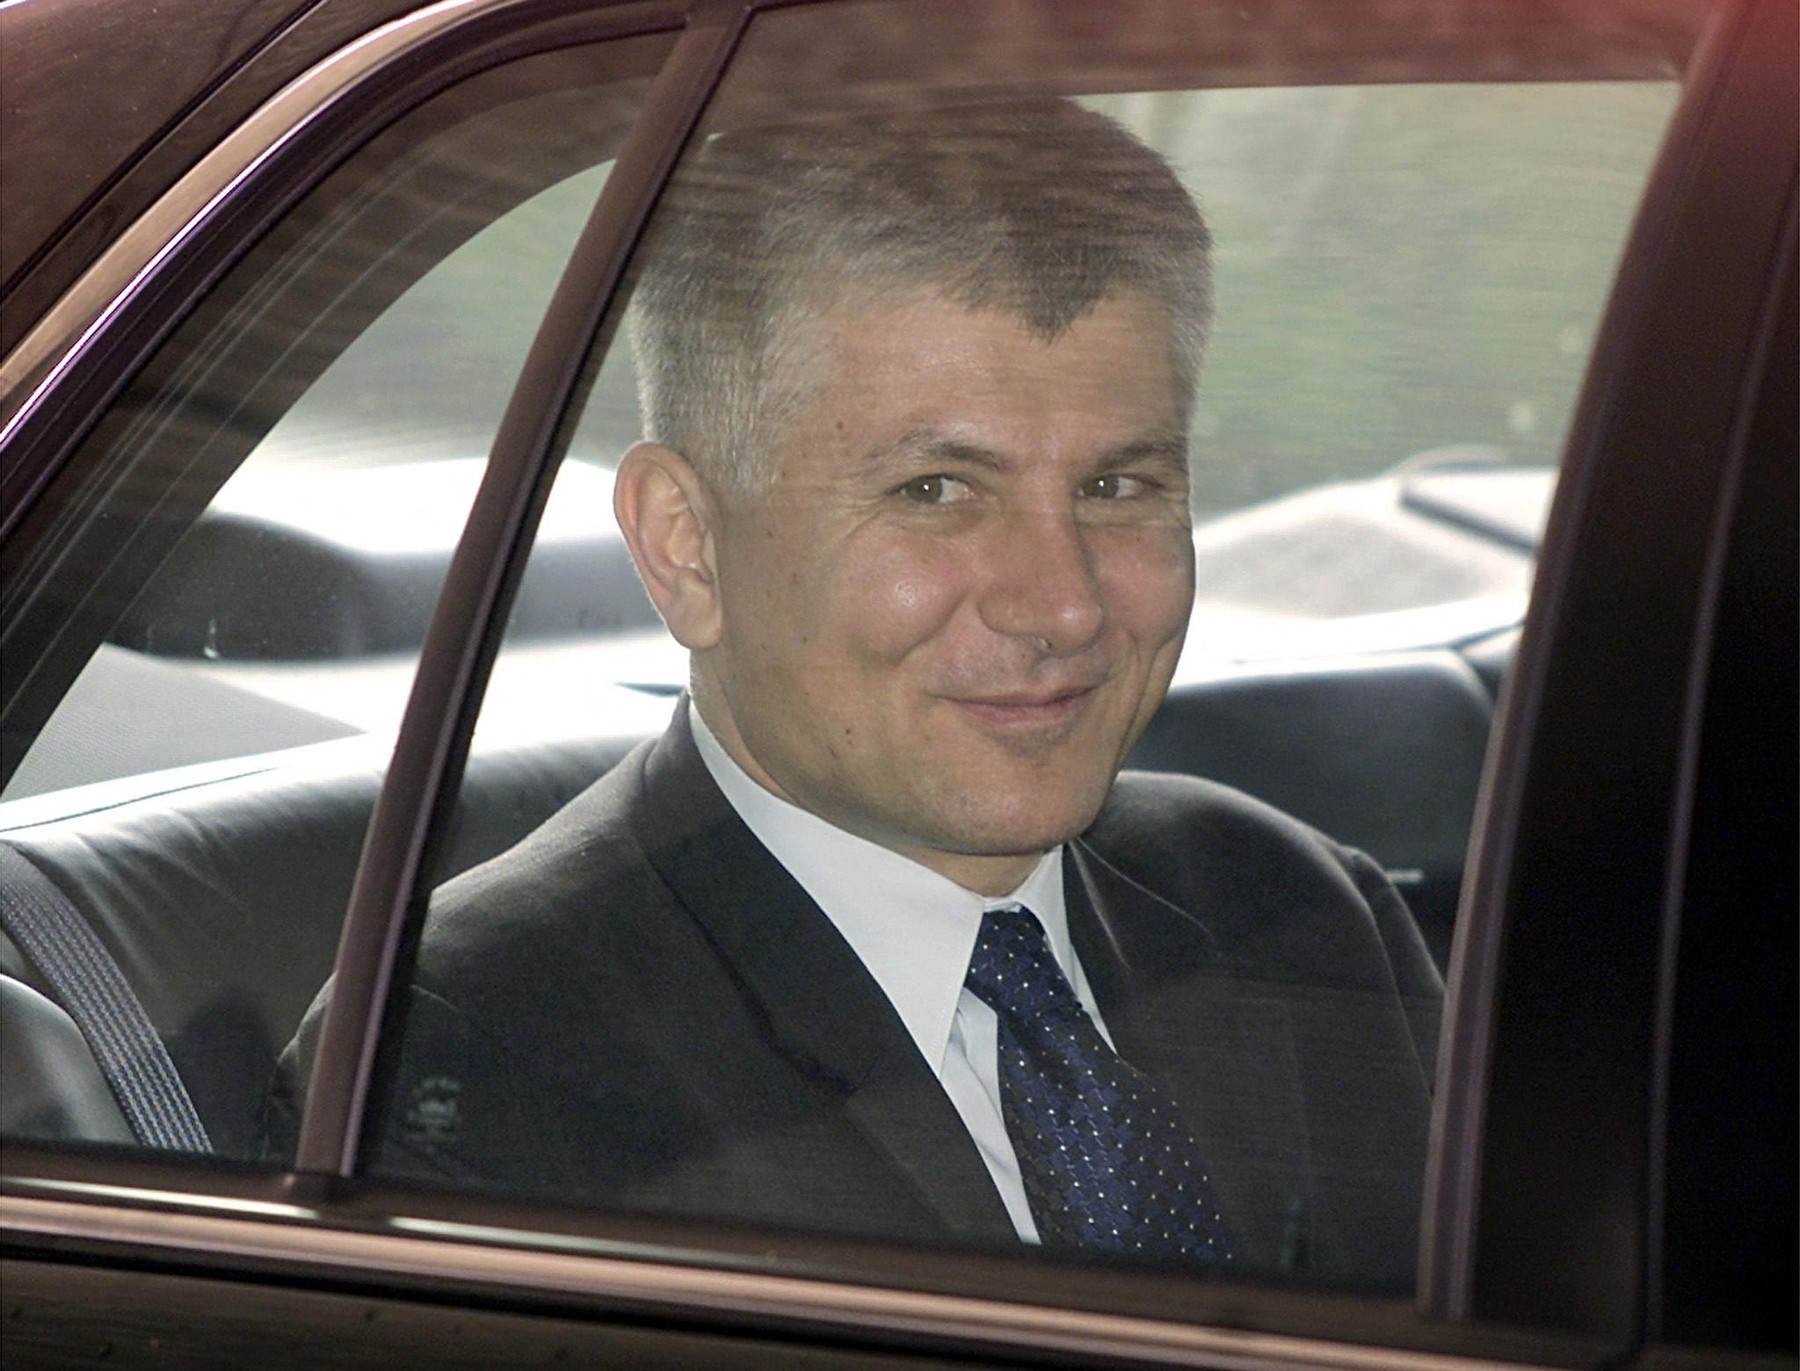 Serbian Prime Minister Zoran Djindjic arrives at the State Department 22 March 2001 for a closed door meeting with US Secretary Colin Powell. Powell and Djindjic are expected to discuss bilateral relations between their countries.,Image: 69069949, License: Rights-managed, Restrictions: , Model Release: no, Credit line: PAUL J. RICHARDS / AFP / Profimedia